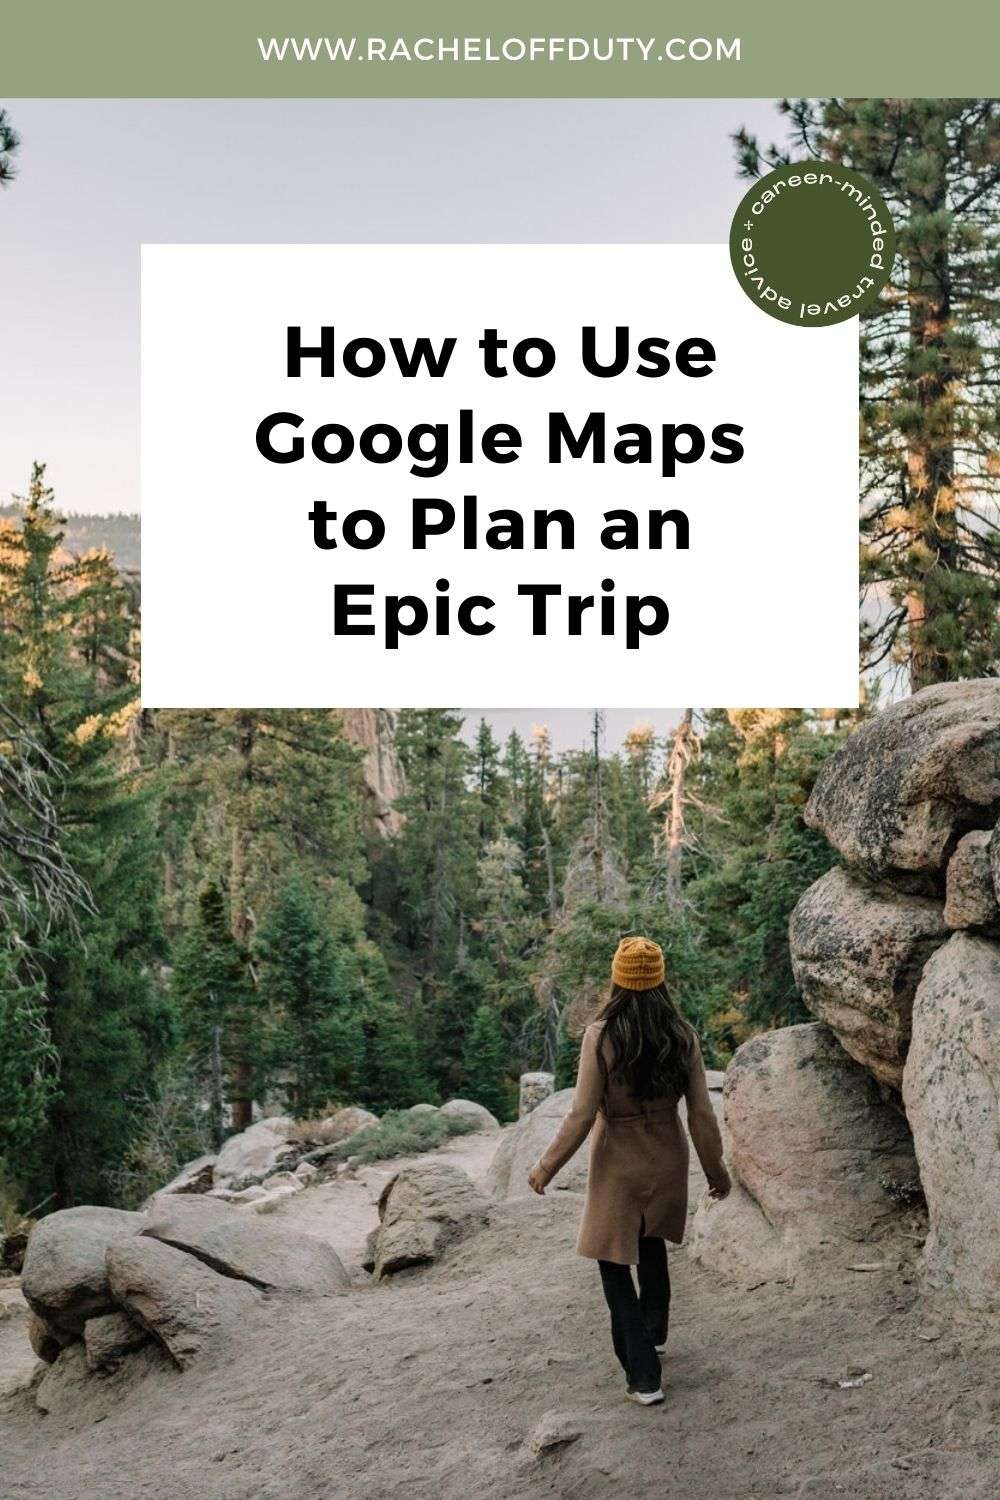 A Step-By-Step Guide to Plan a Trip with Google Maps – Rachel Off Duty